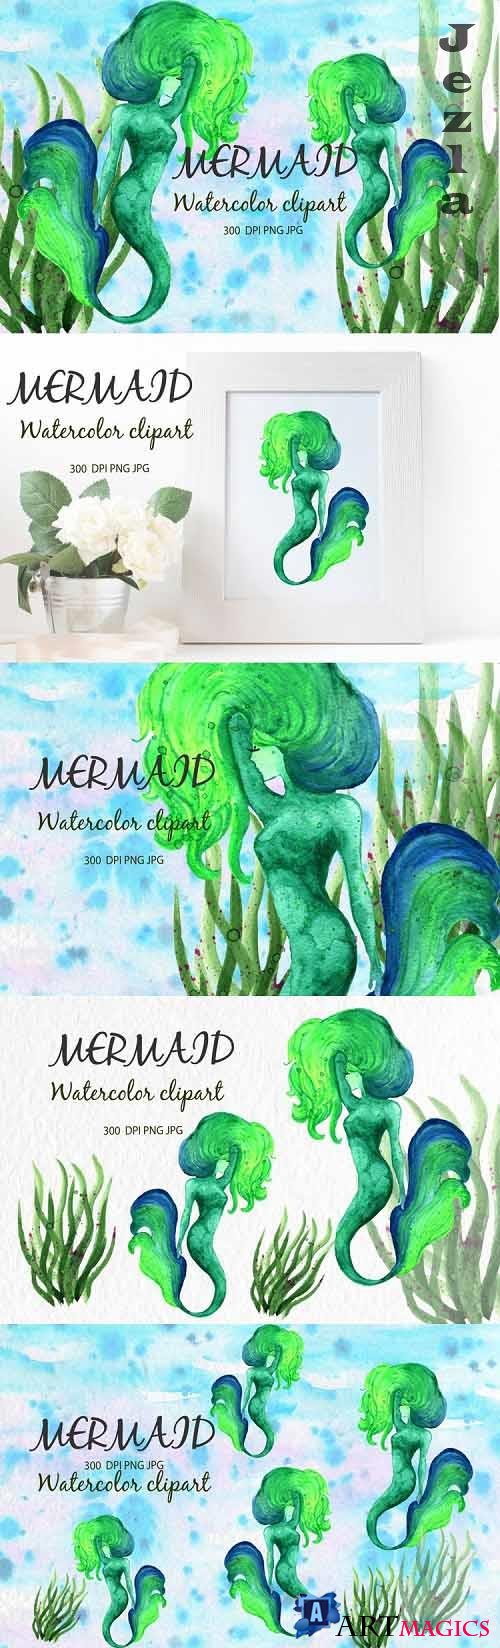 Watercolor clipart Mermaid Gute For Children's Greeting Card - 1180936